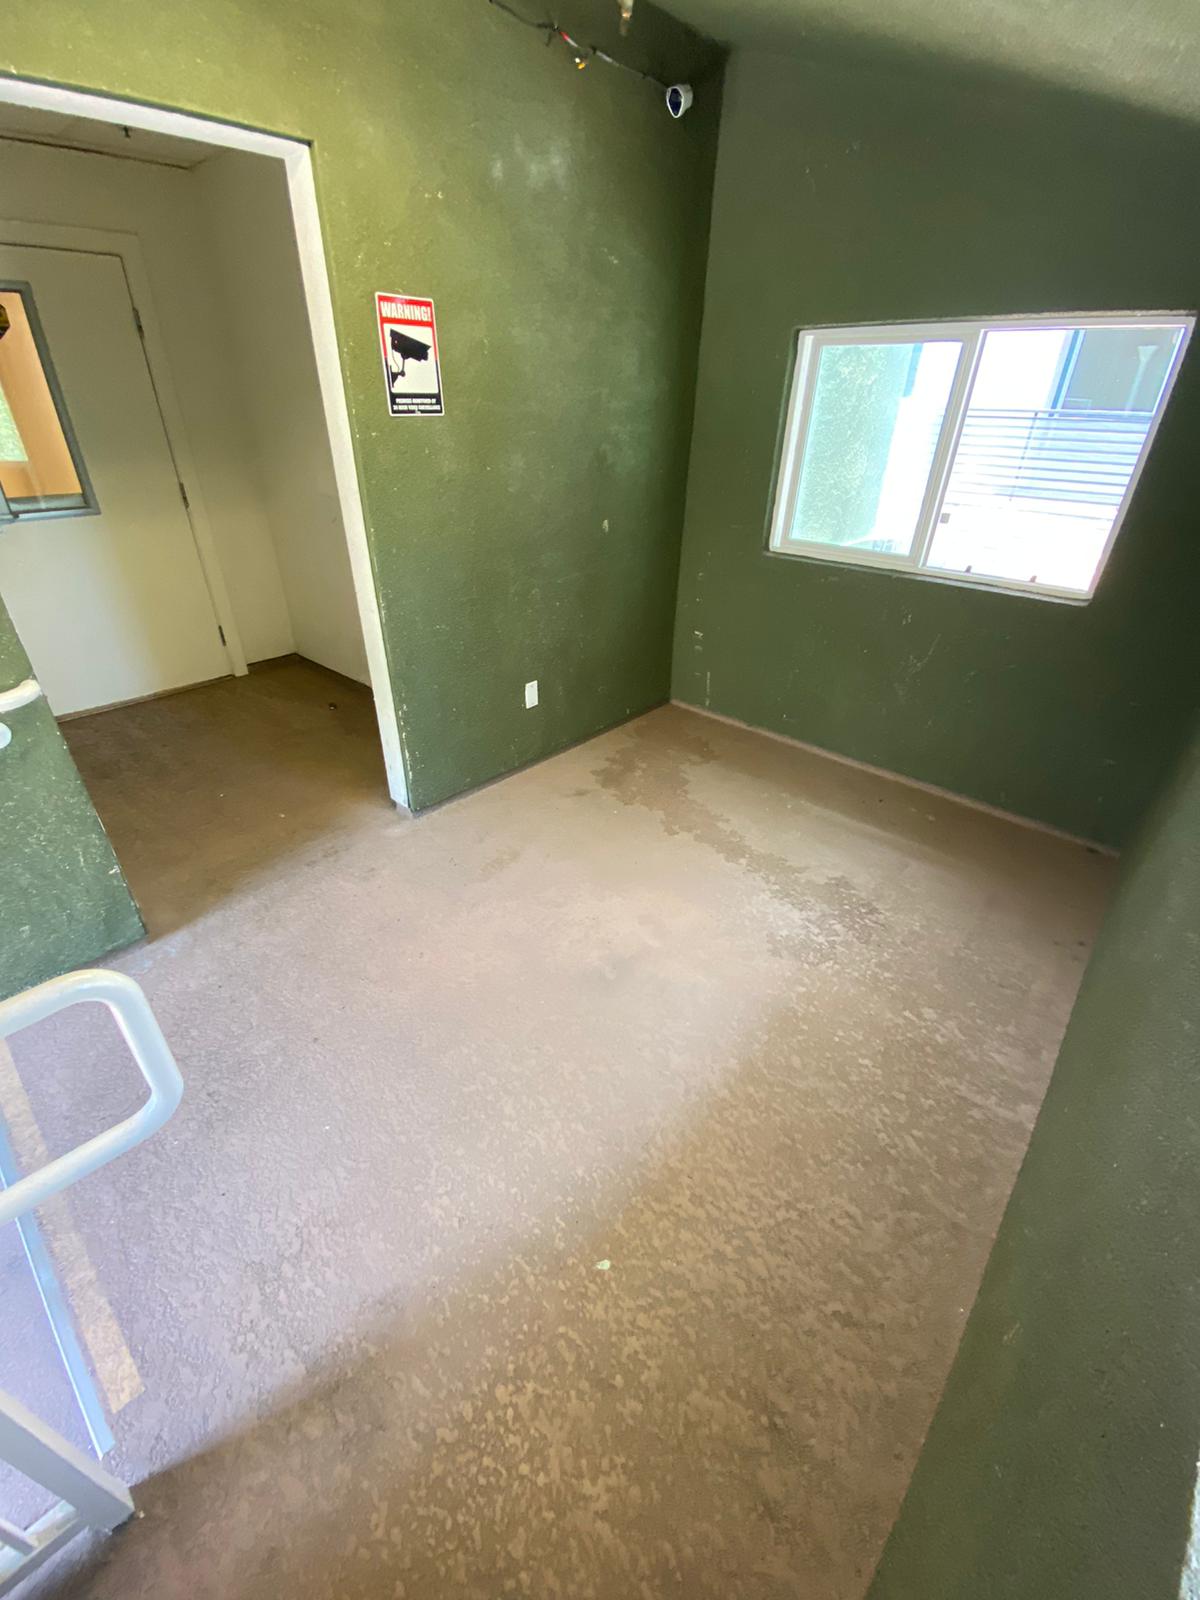 image of area at Klump. small area or hall with window and security camera